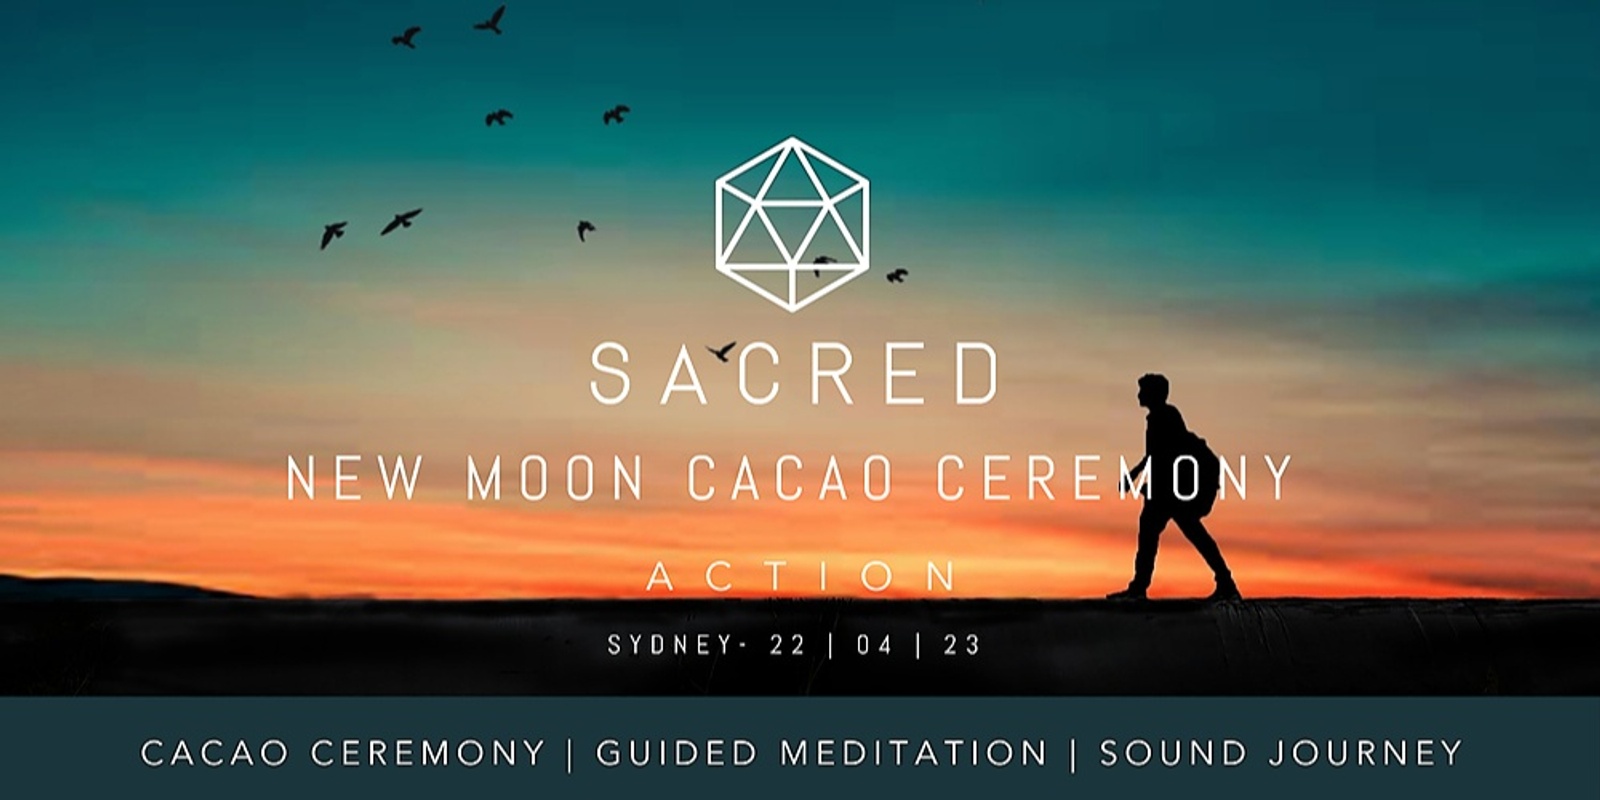  Sacred New Moon Cacao Ceremony - Action - Sydney